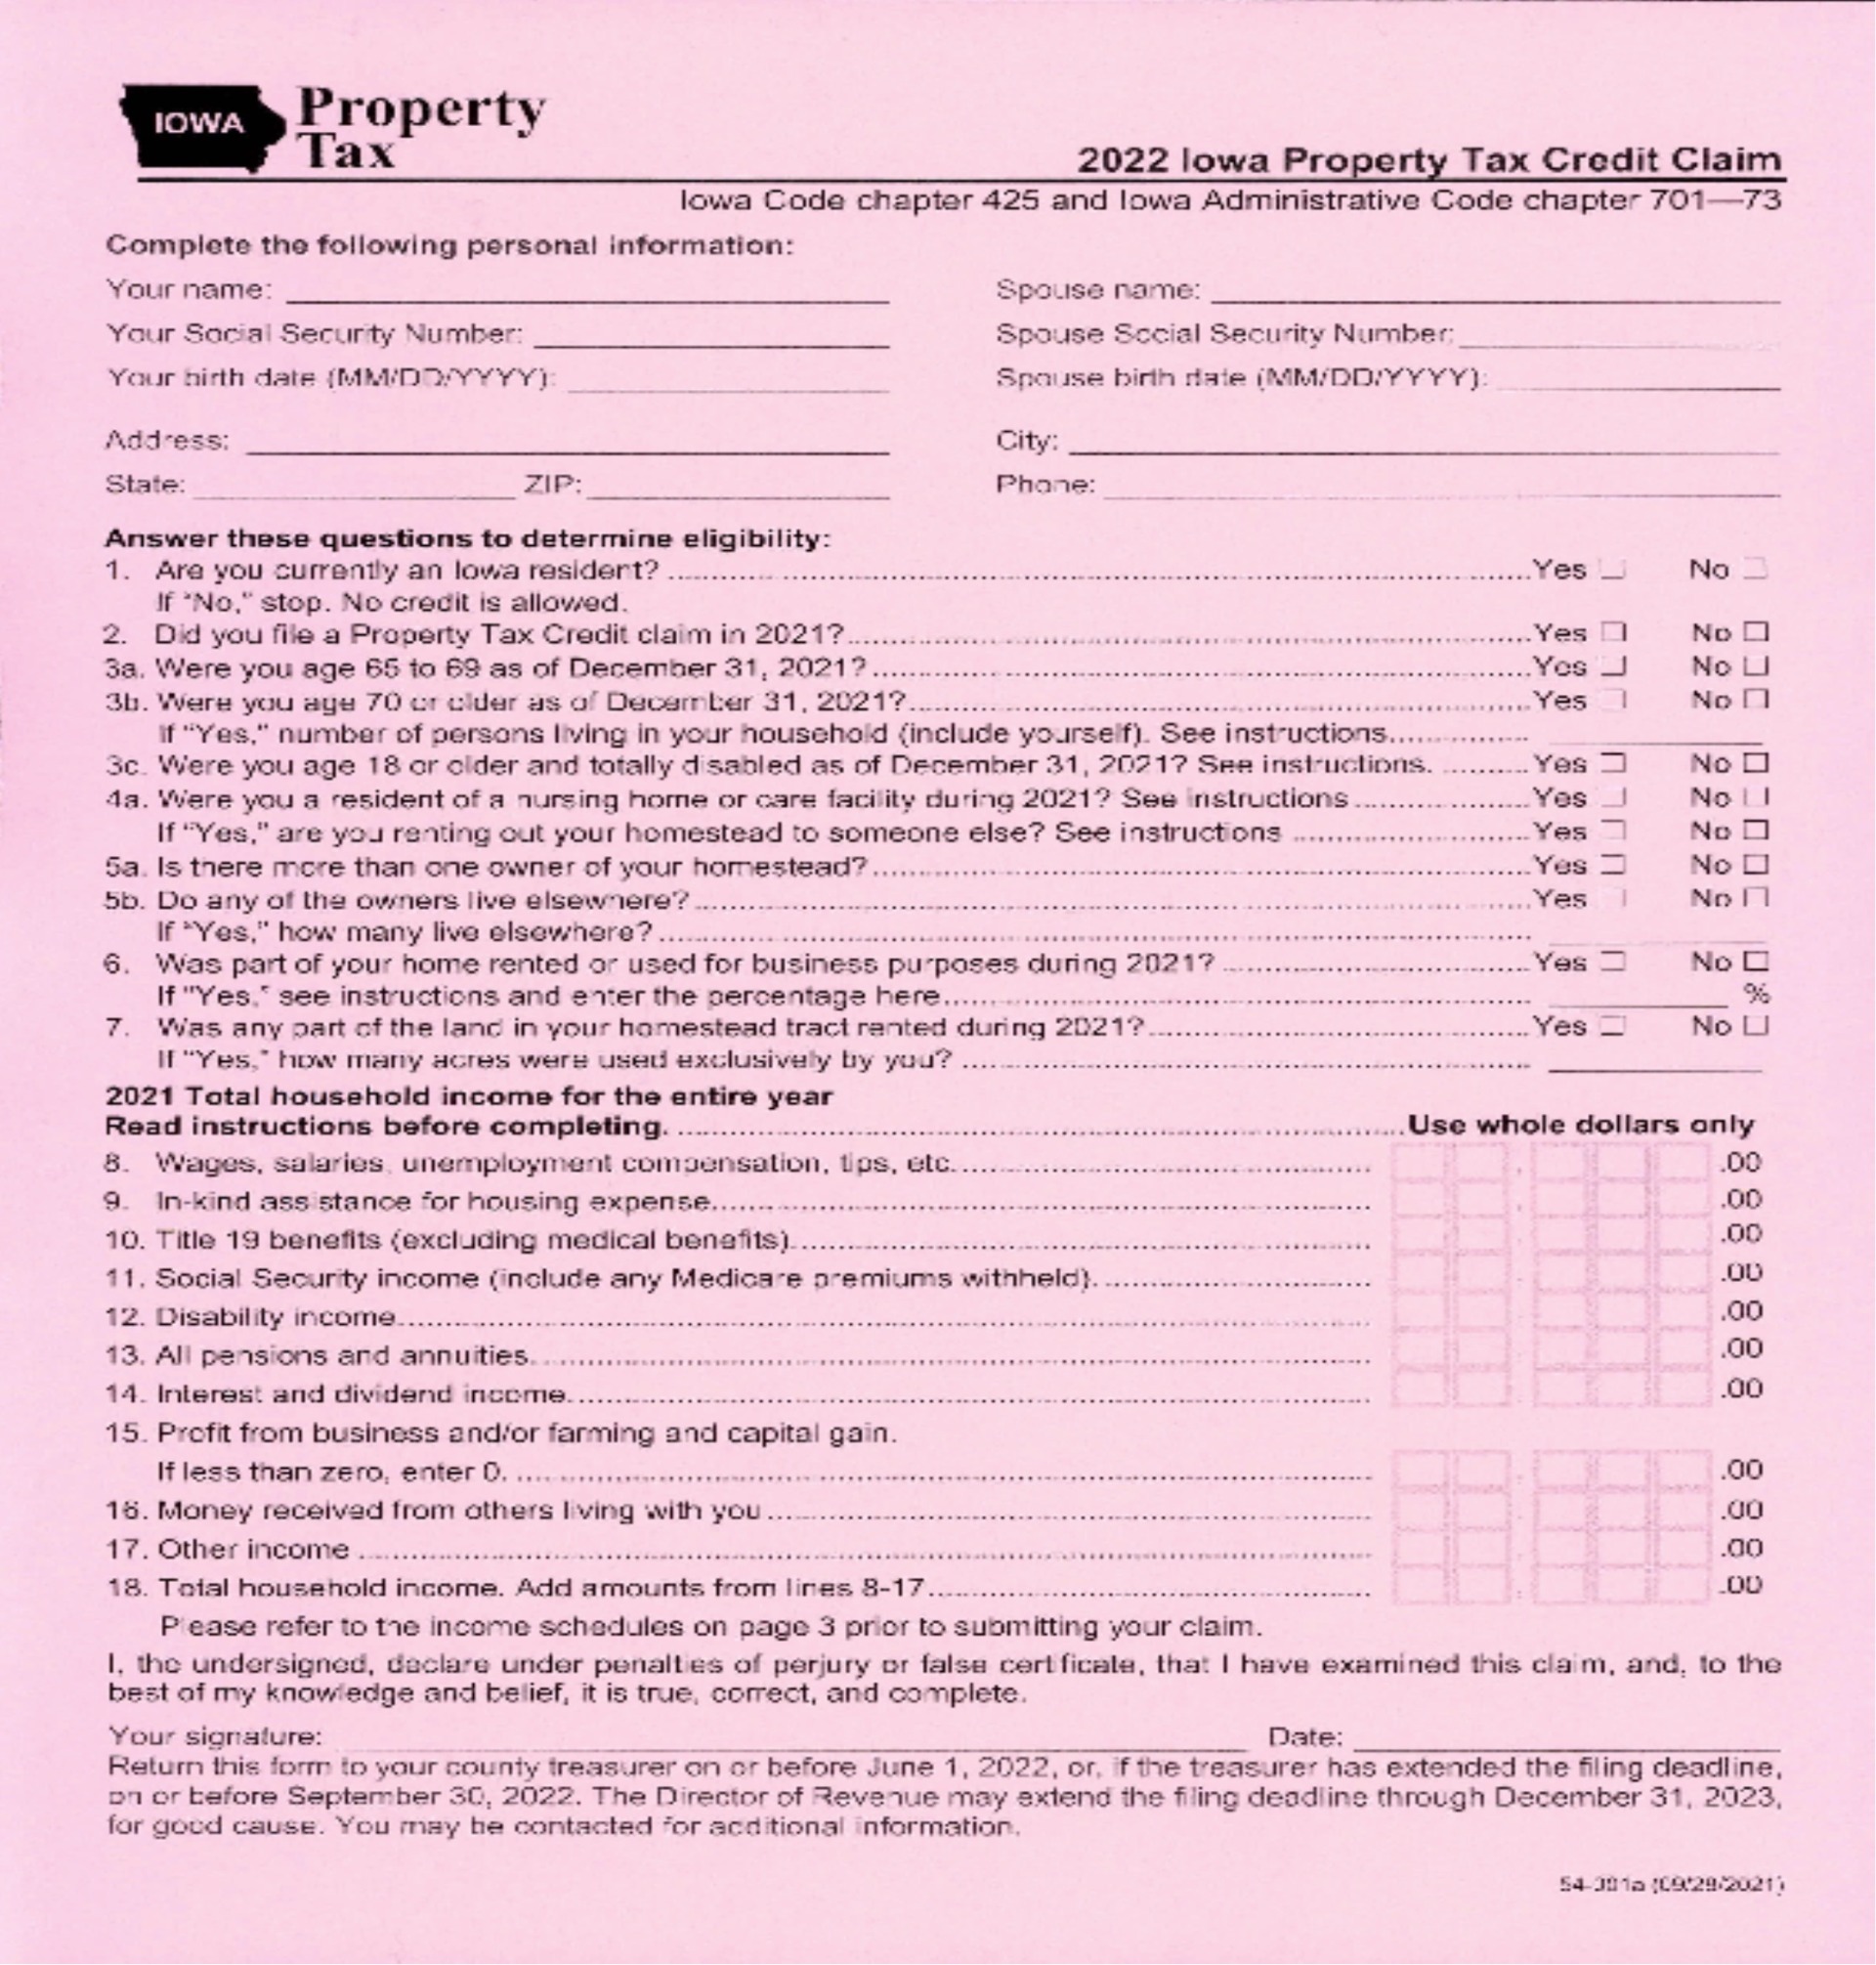 Example of the elderly and disabled tax credit form.